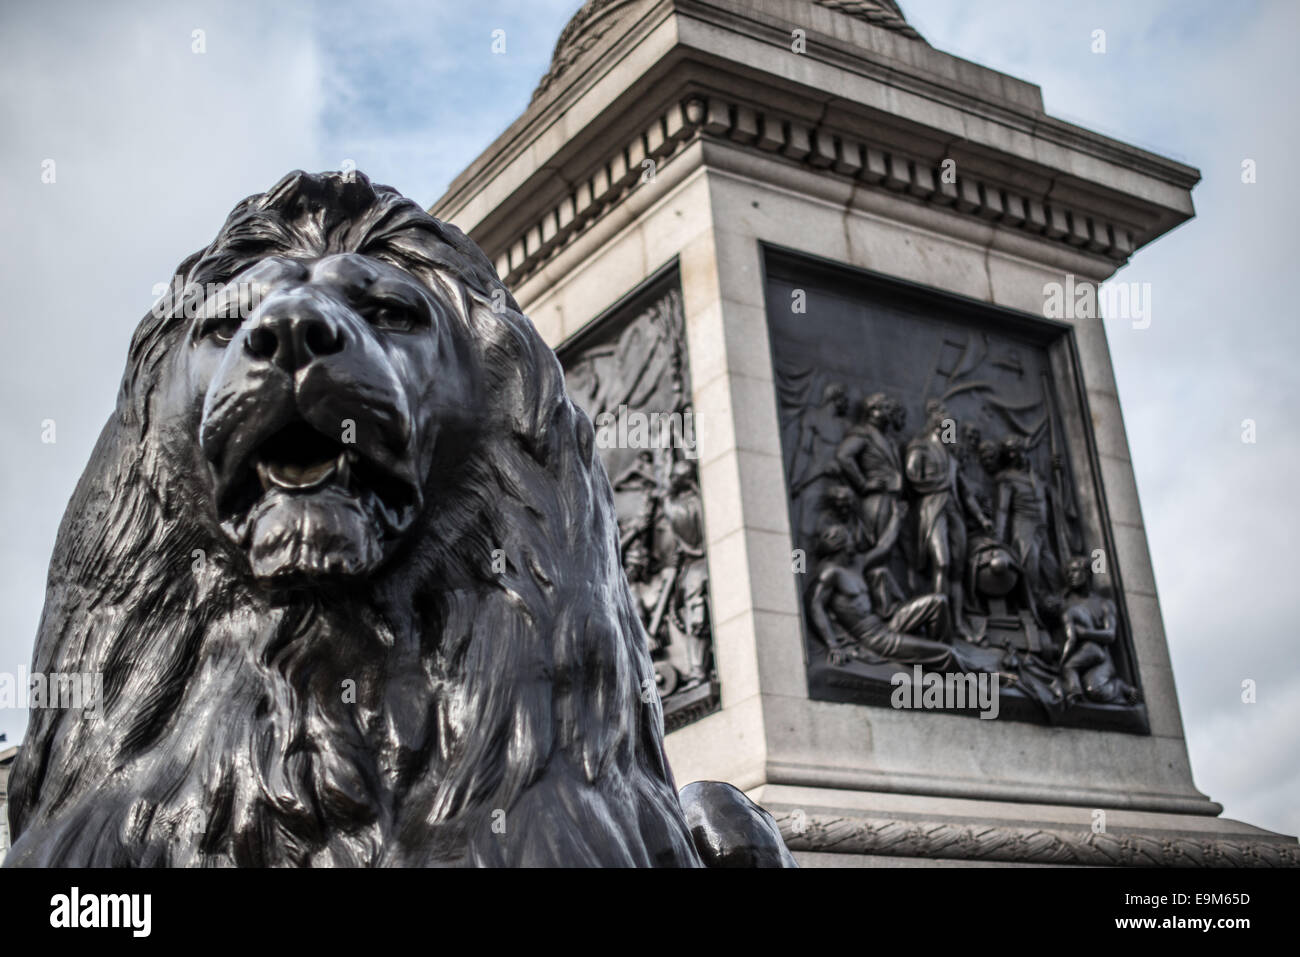 LONDON, UK - One of four large statues of lions that sit at the base of Nelson's Column in Trafalgar Square in central London. Built to commemorate Admiral Horatio Nelson's victory at the Battle of Trafalgar, the square serves as both a historic site and a central hub for cultural and community events. Stock Photo